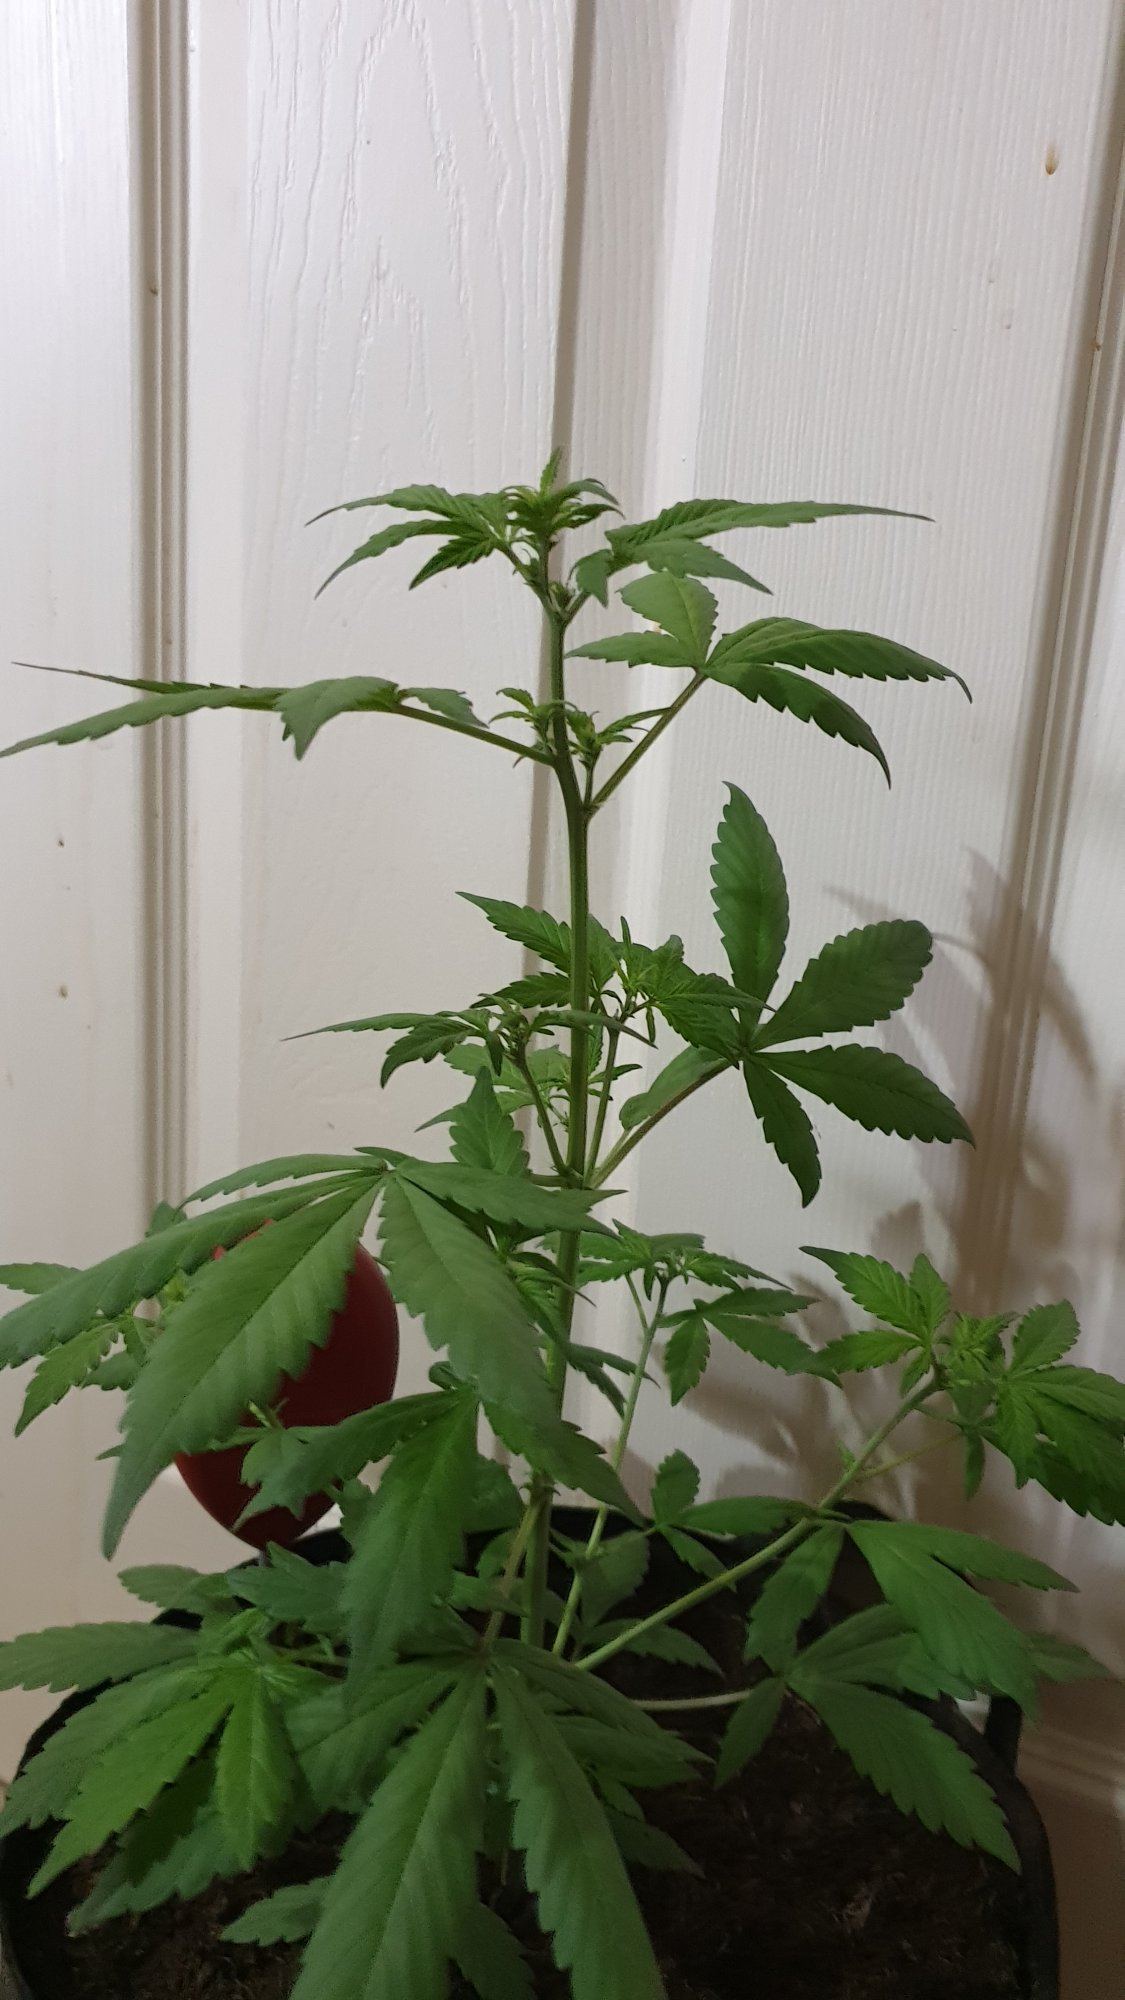 Lsd 25 autoflower  is she stretching 3